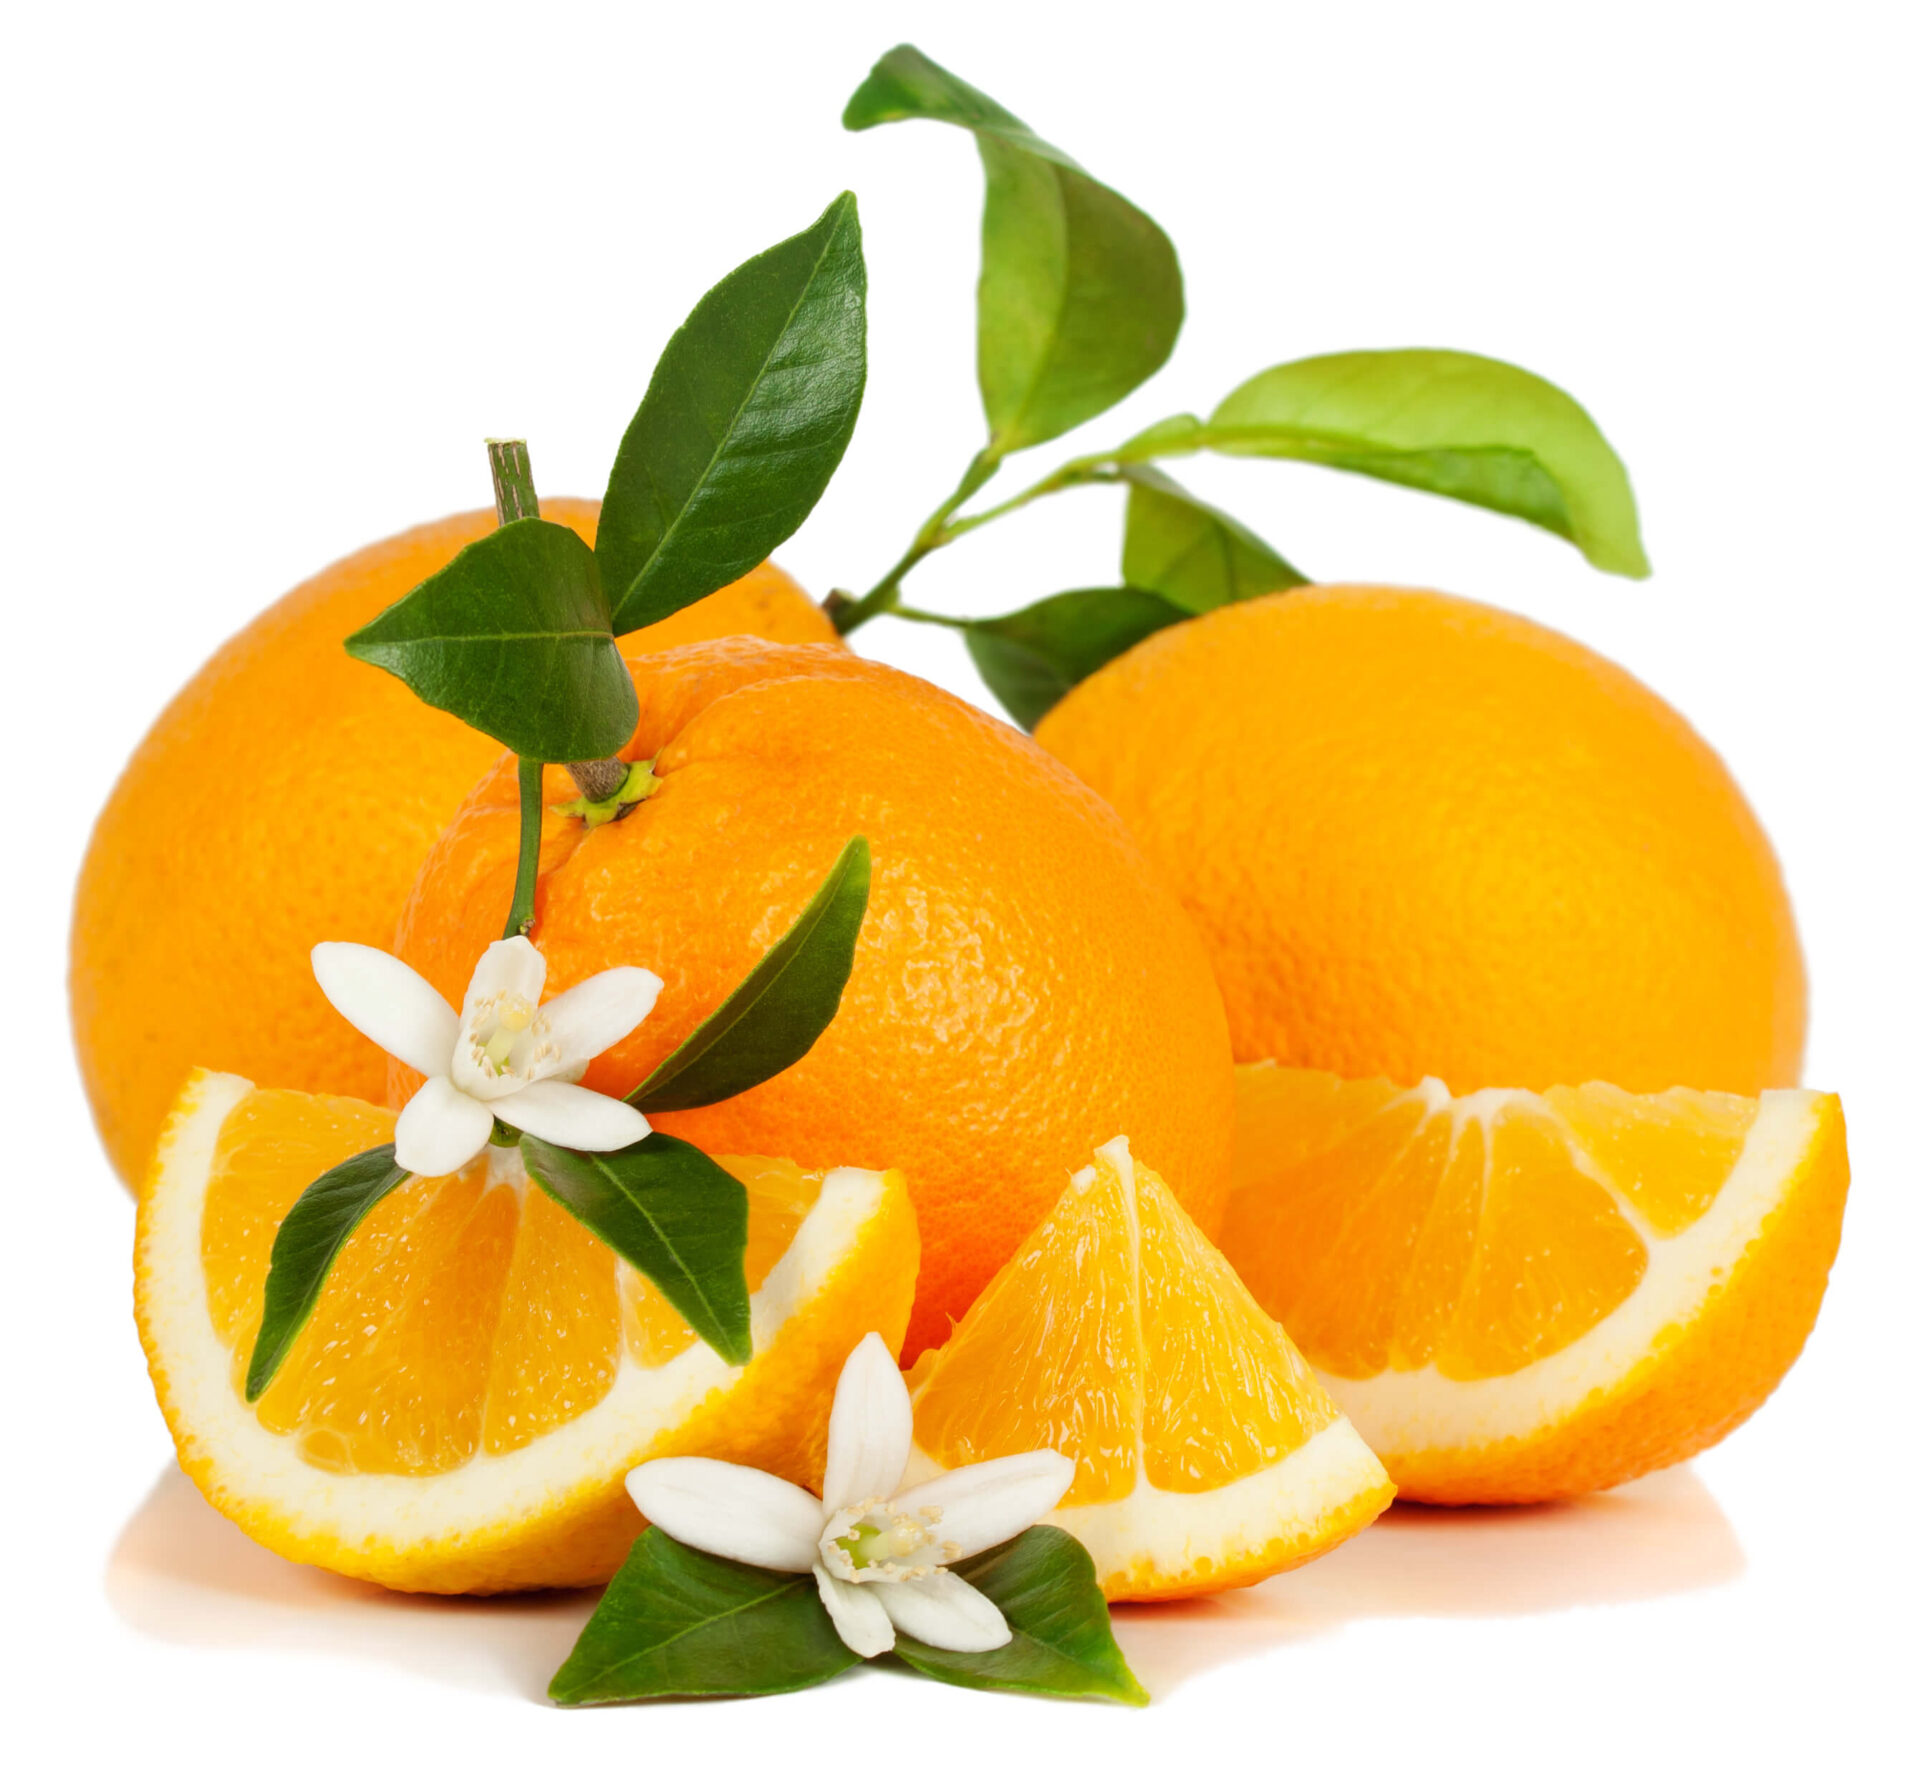 Whole oranges, orange blossoms and orange segments is representative of some of our flavor ingredients